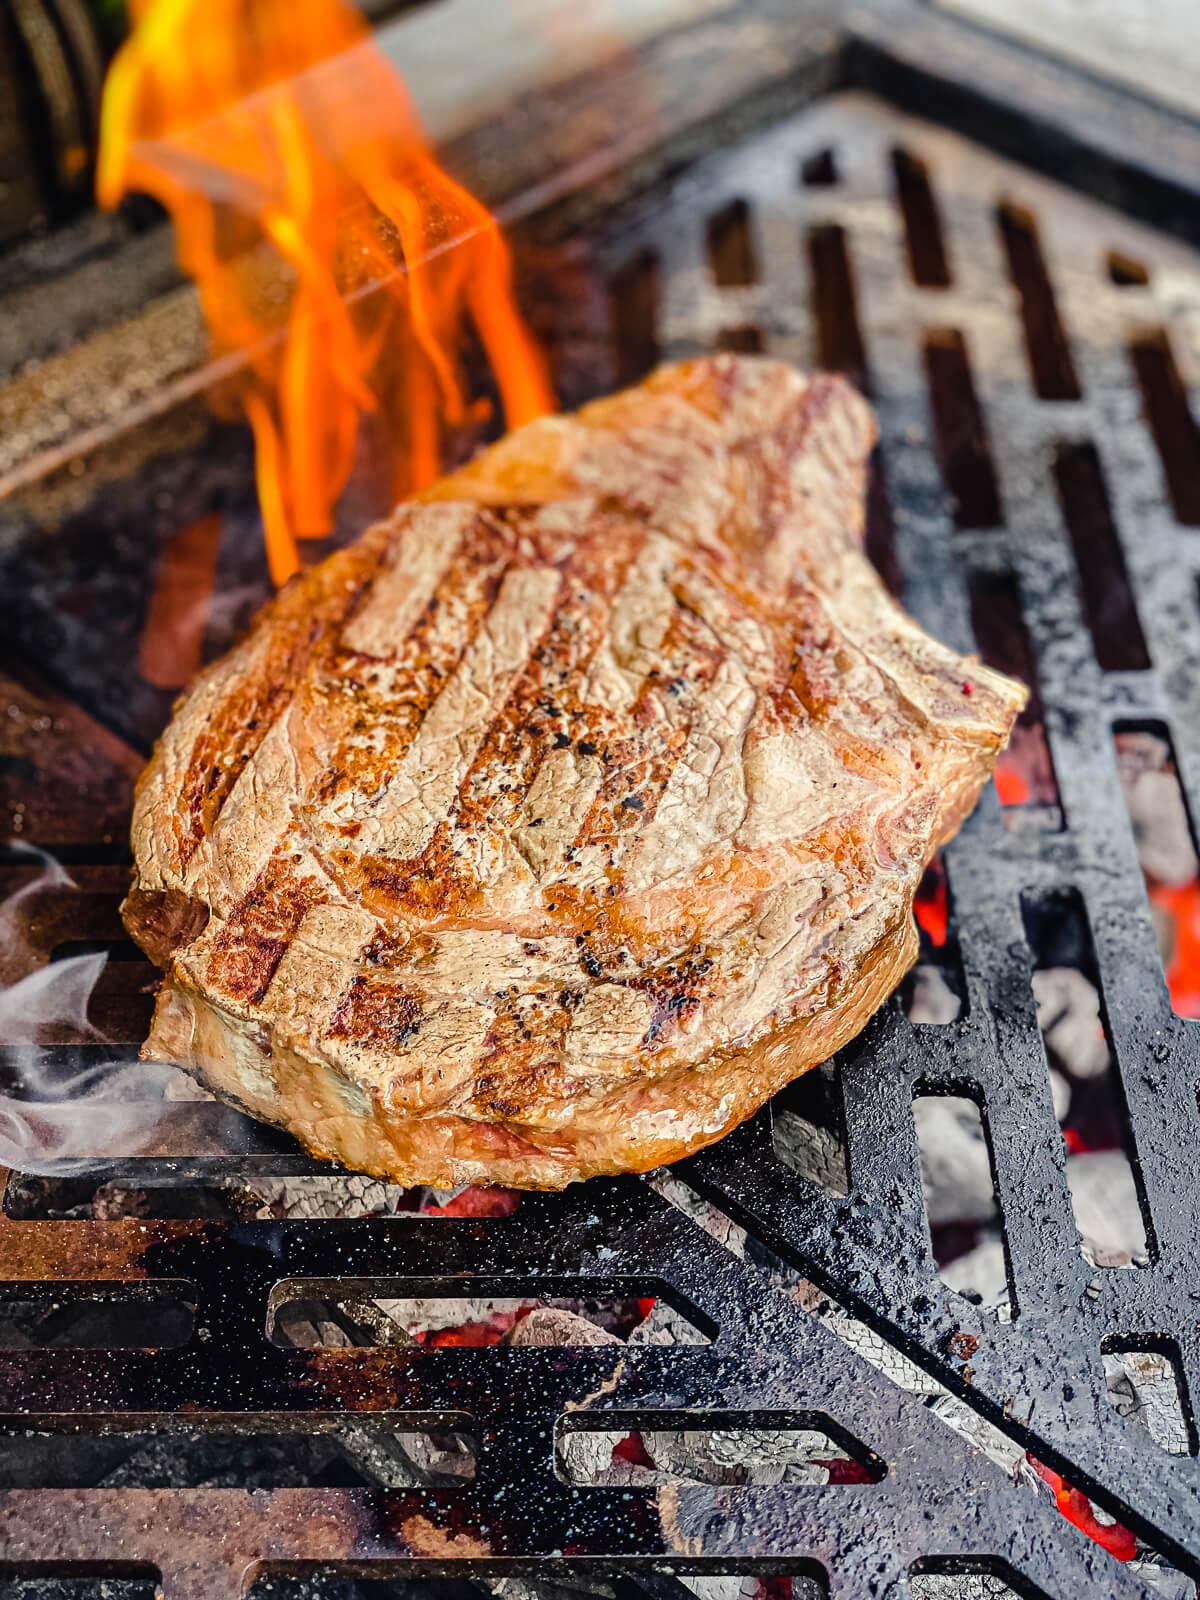 ribeye steak on grill grates with flames